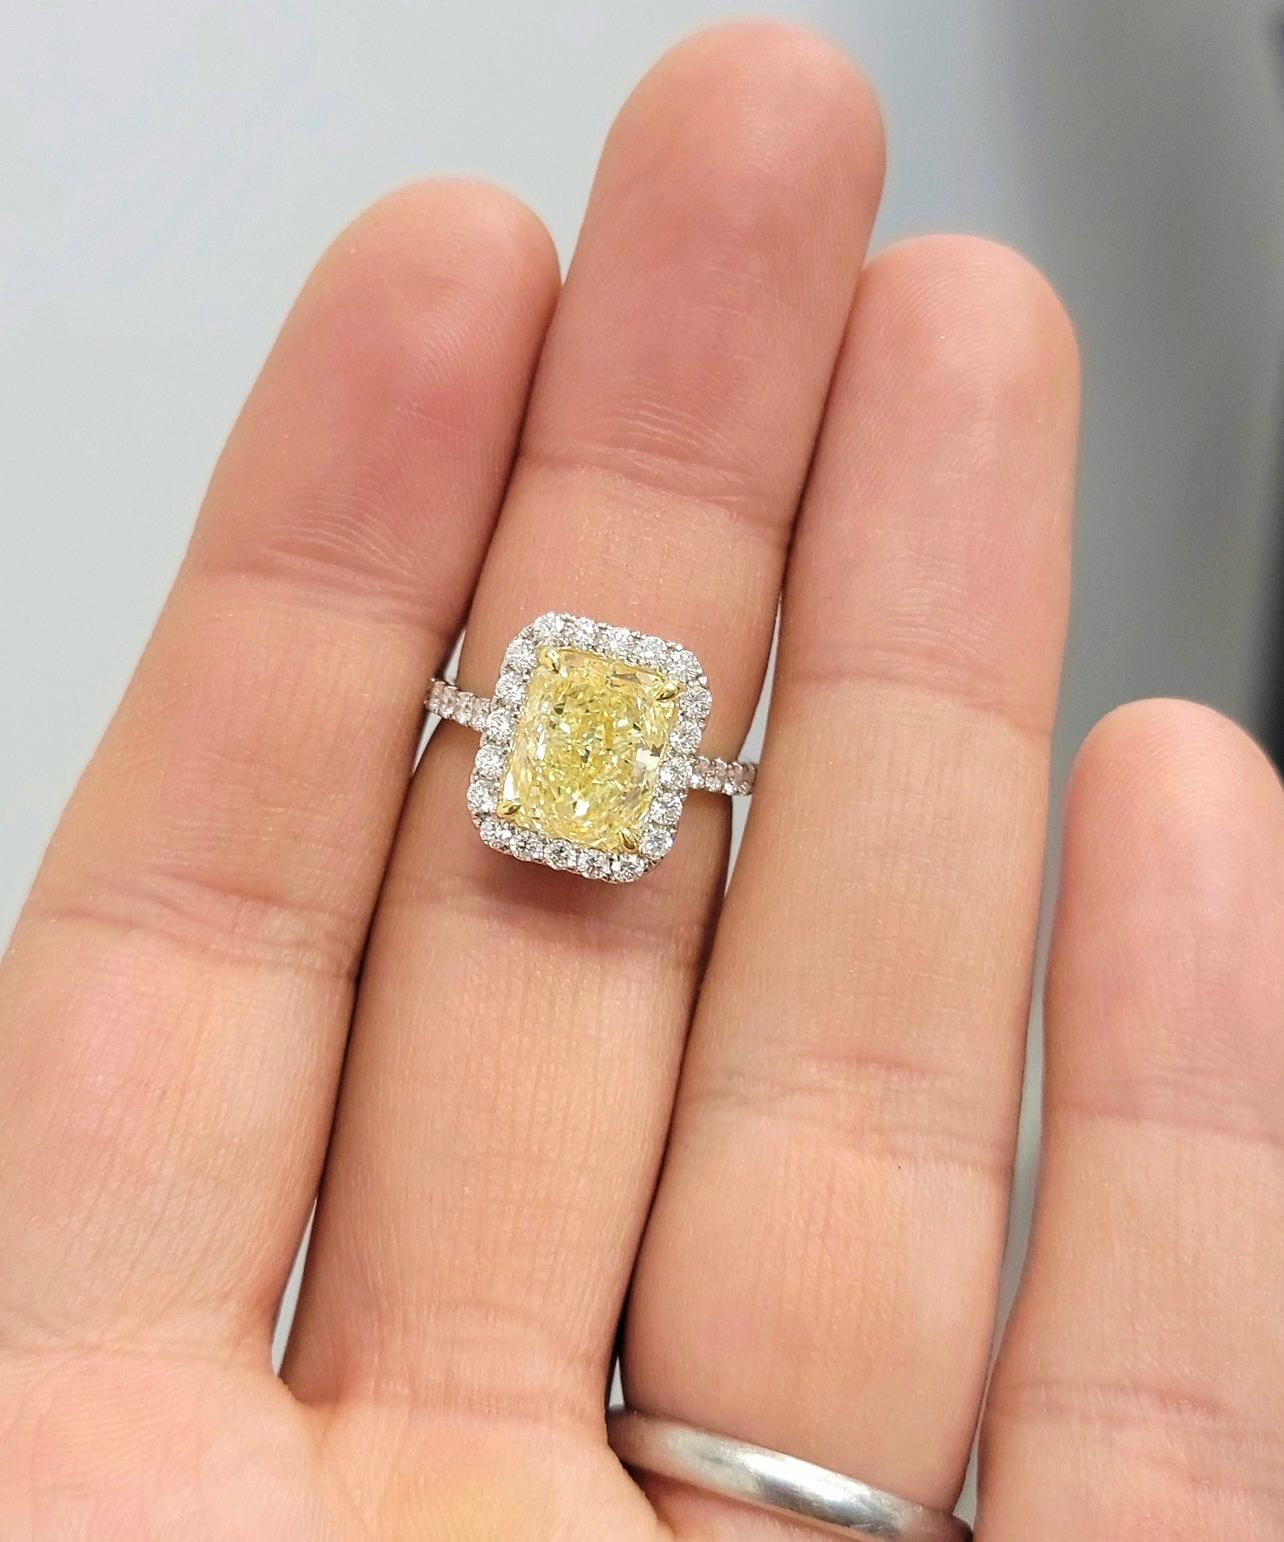 Bright lemon yellow Radiant certified as U-V color set in 18kt WG with over half a carat of white round diamonds
Rectangular radiant with almost 10mm length
Nice fire, 100% eye clean

Making Extraordinary Attainable with Rare Colors
